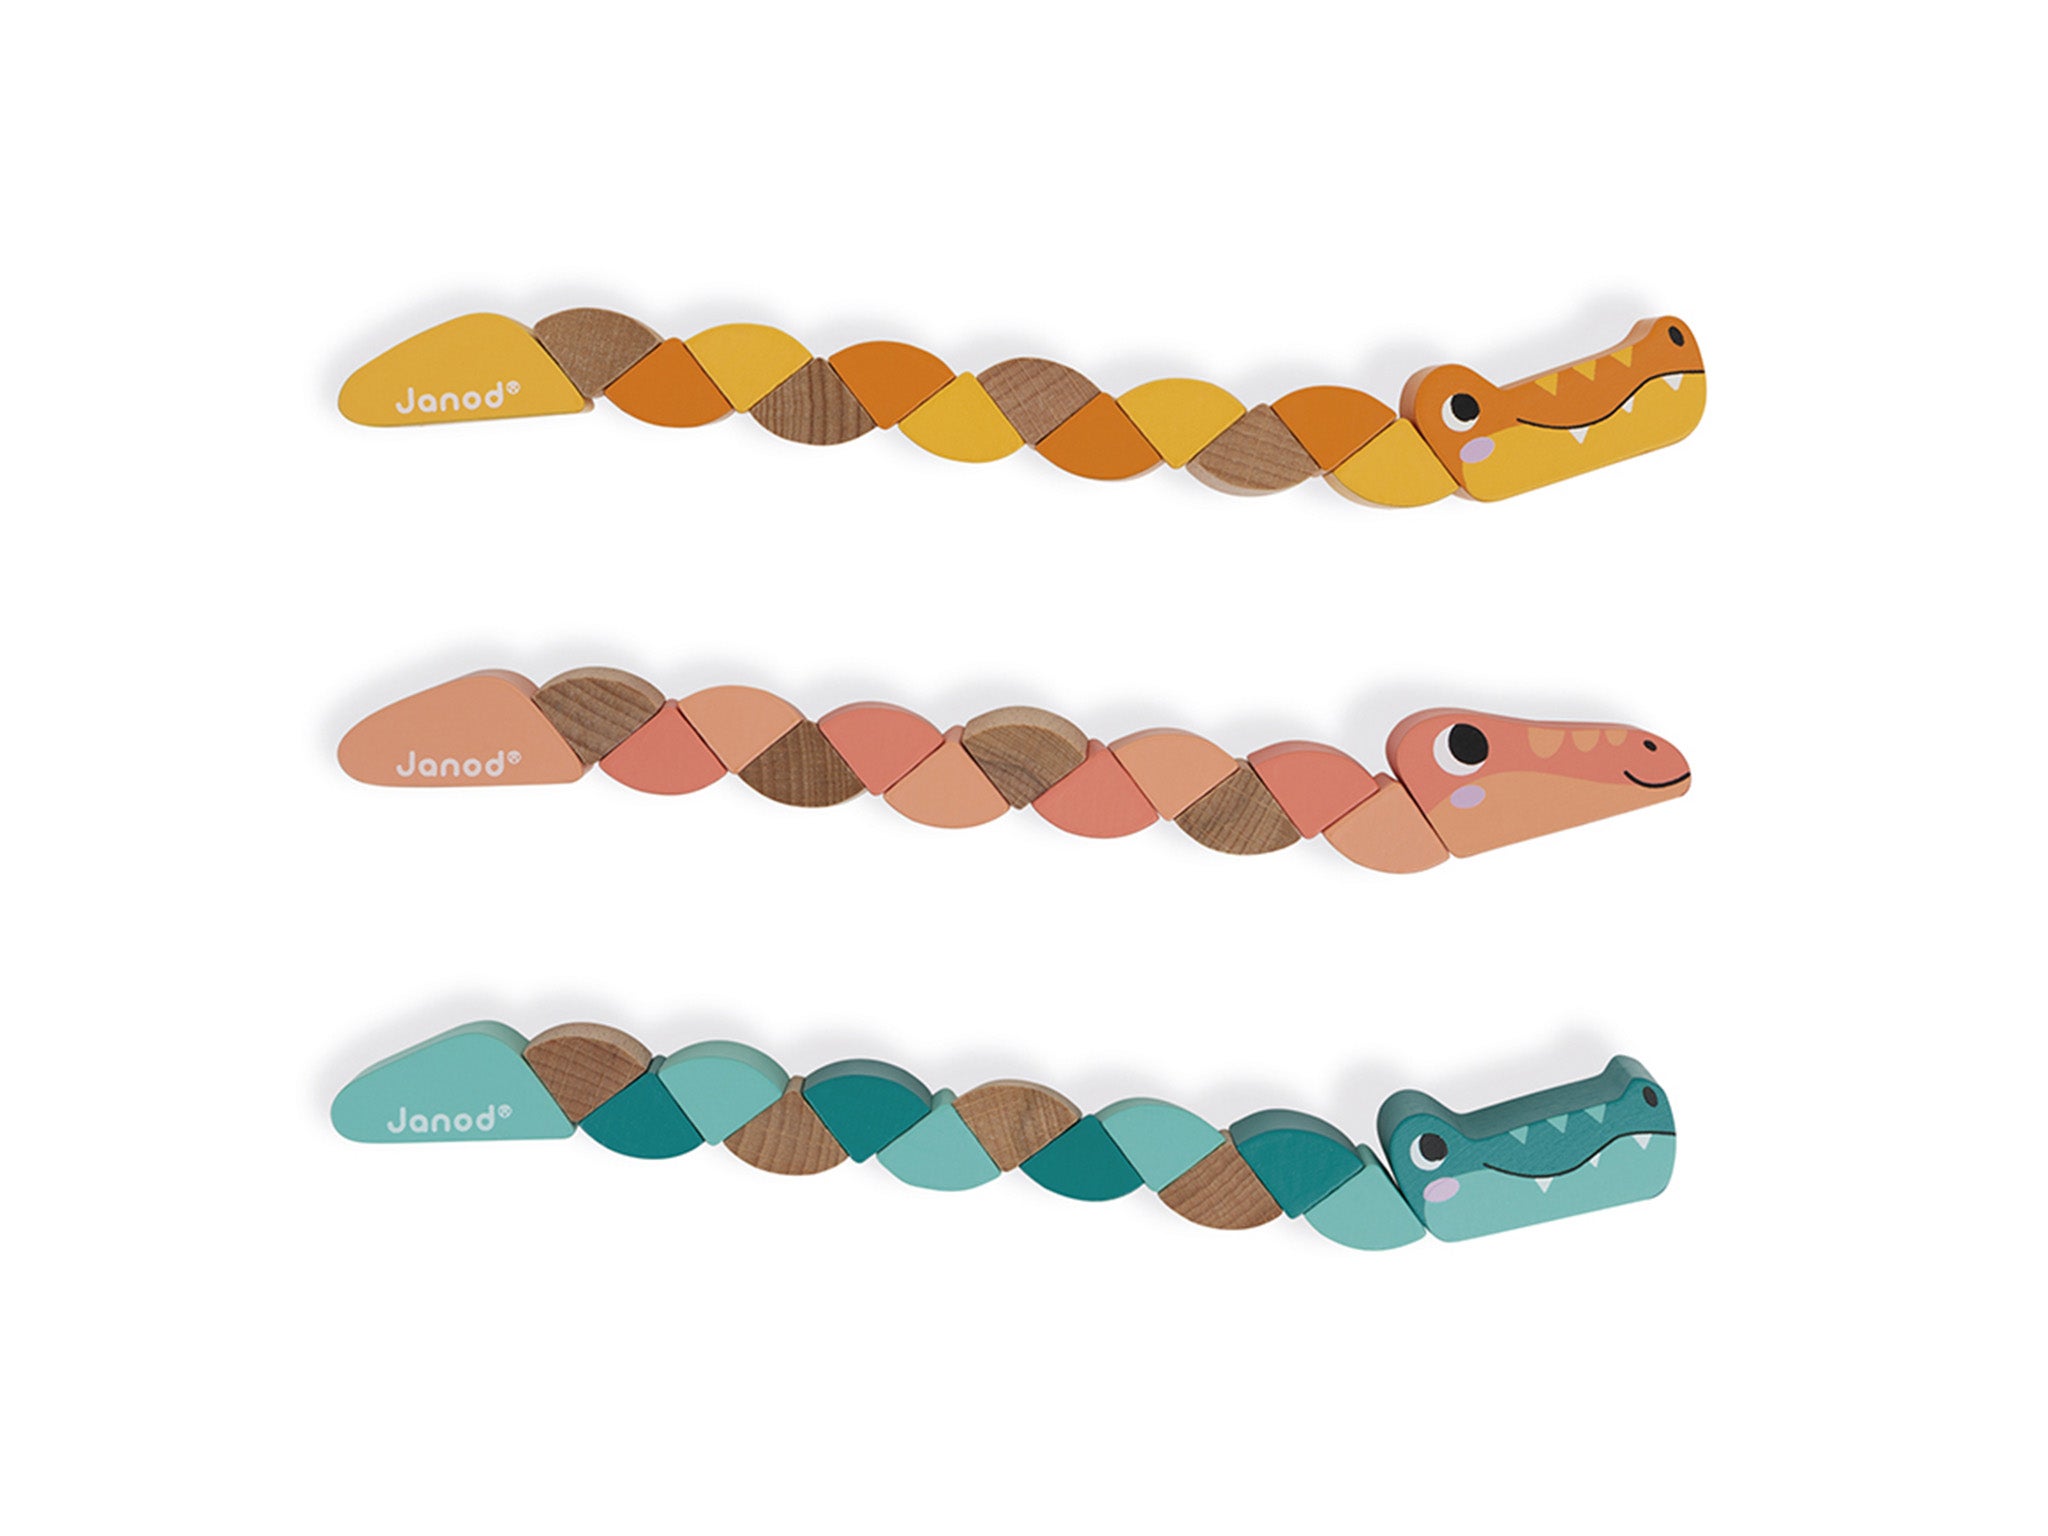 Janod pocket articulated snake and crocodile fidget toy.jpg